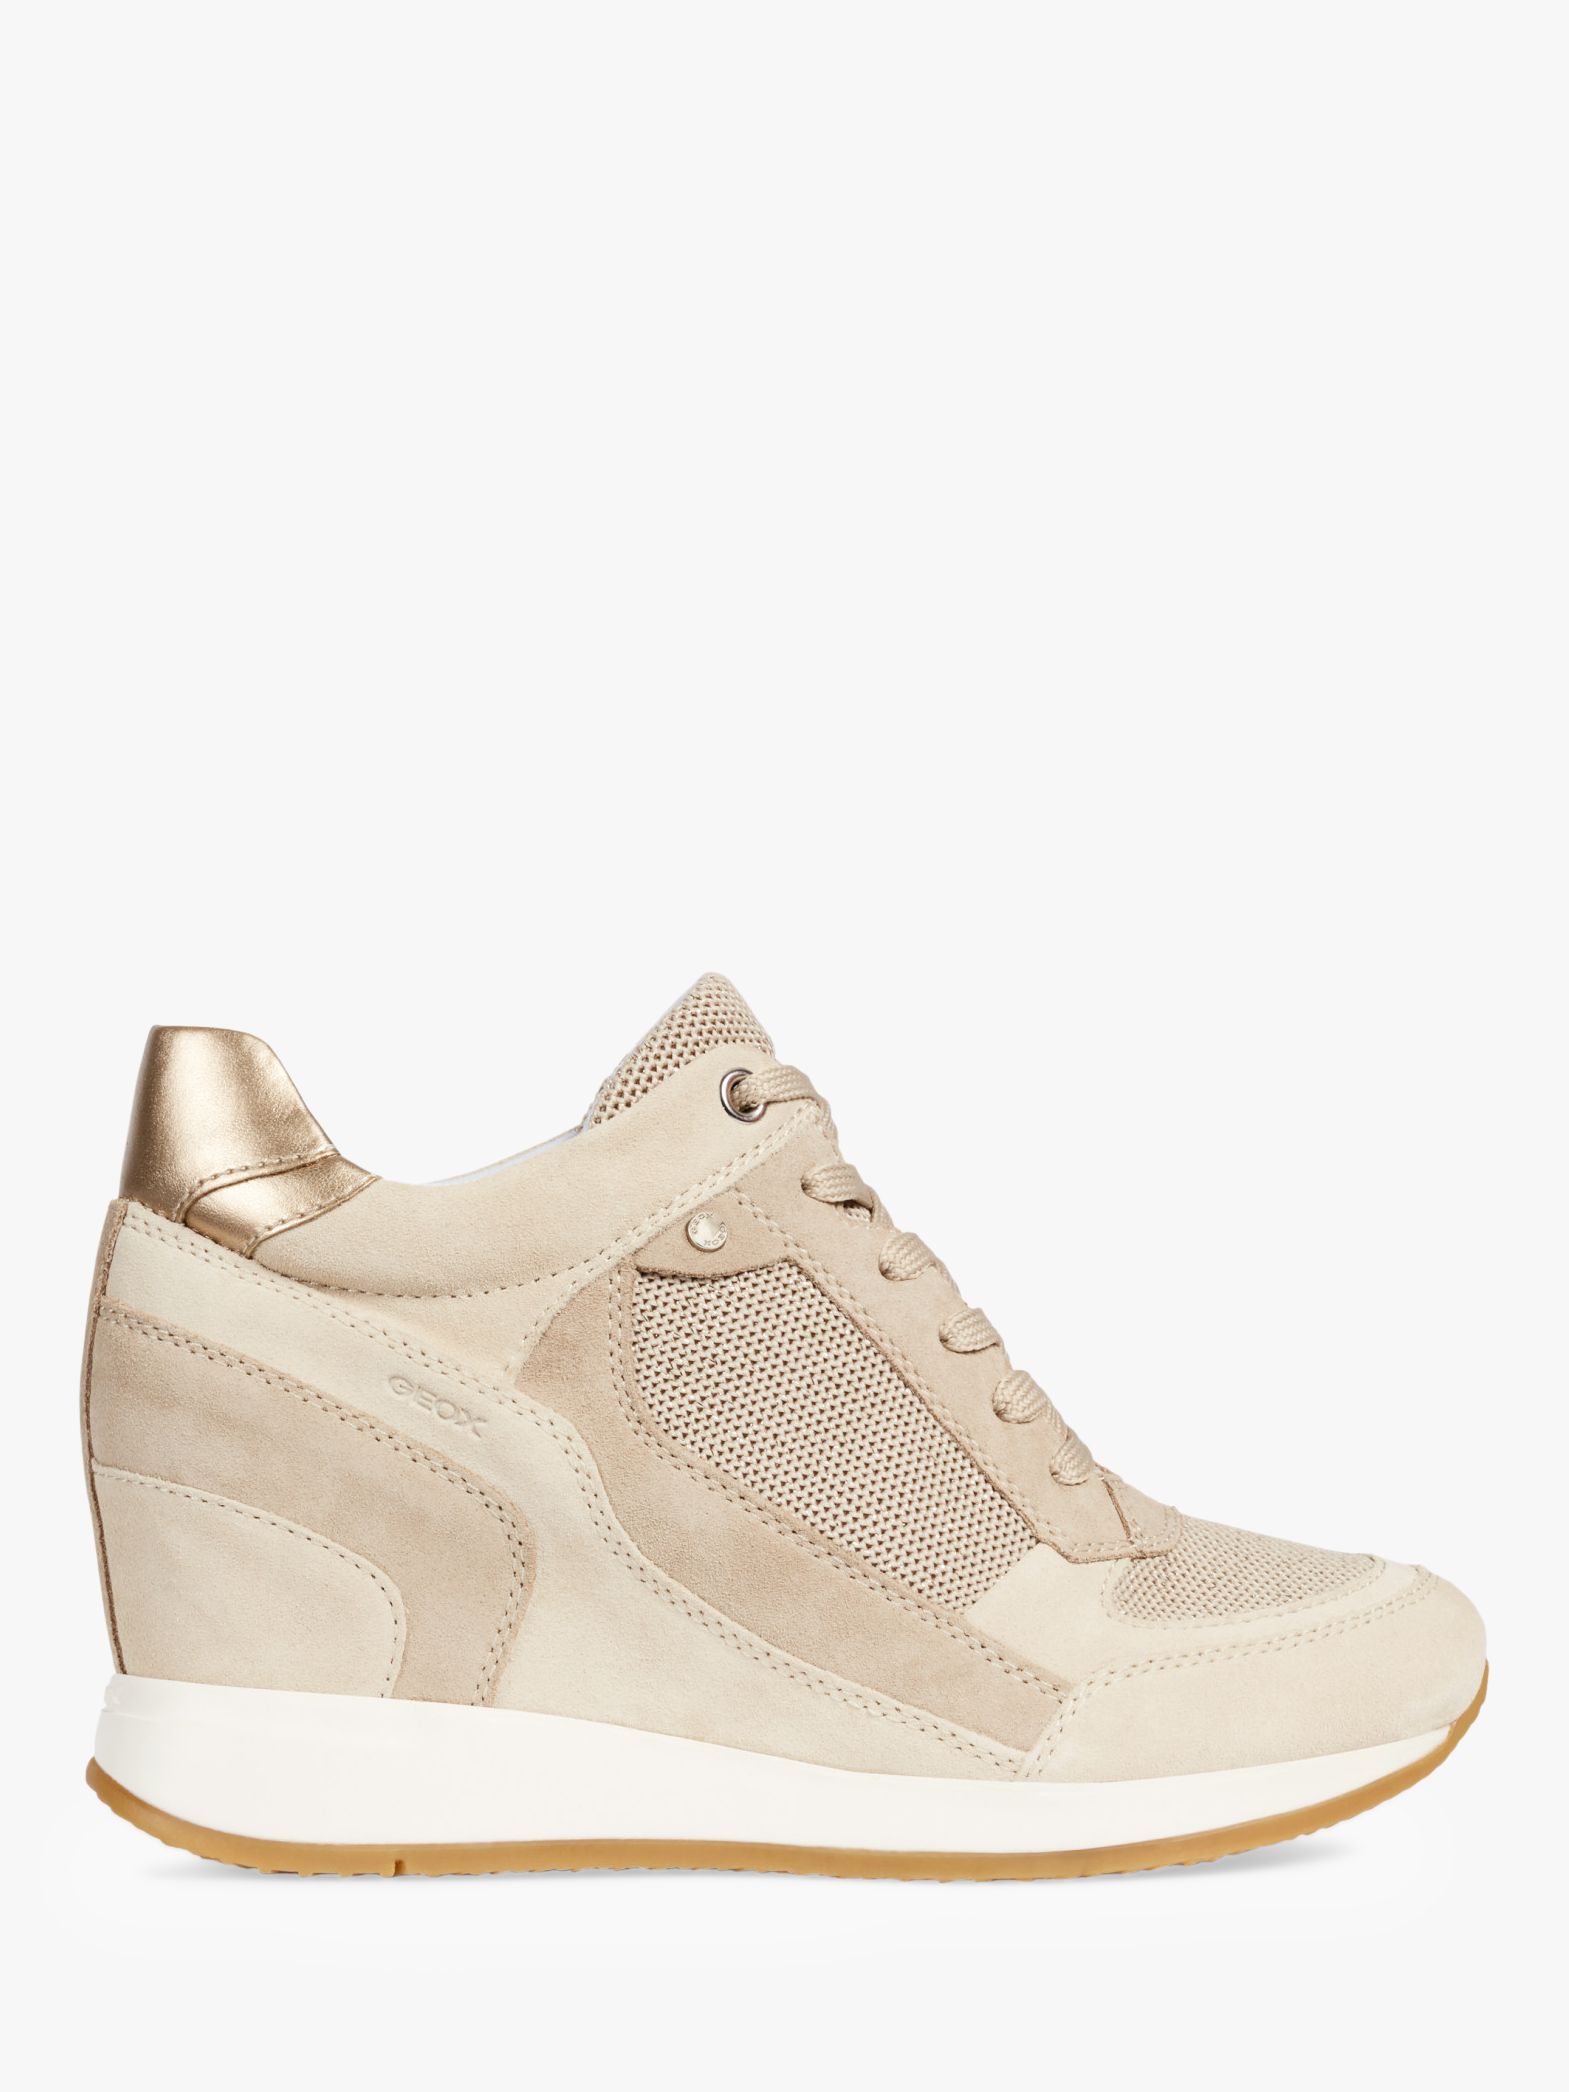 trainers with wedge heels uk